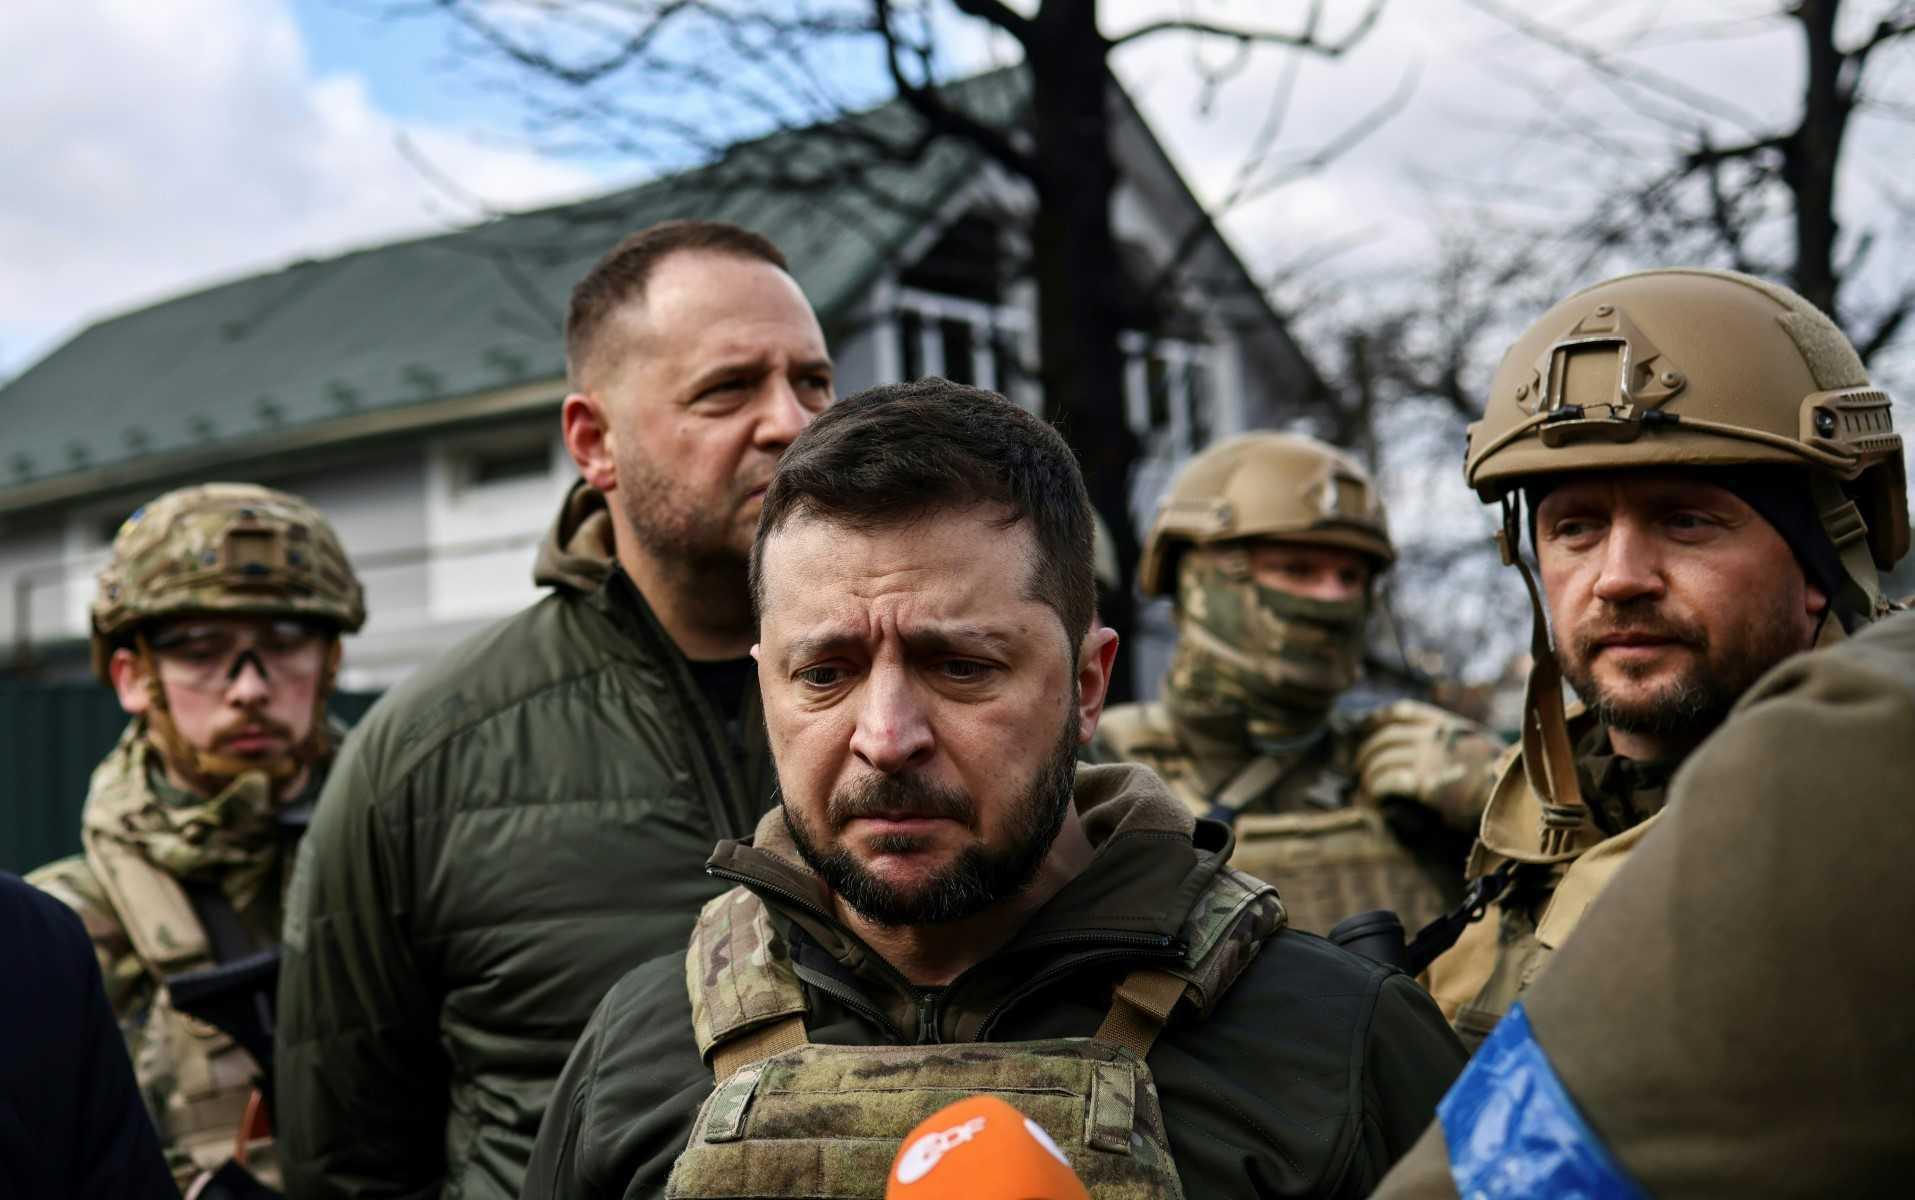 Ukainian President Volodymyr Zelensky speaks to the press in the town of Bucha, northwest of the Ukrainian capital Kyiv, in this April 4 file photo. Photo: AFP